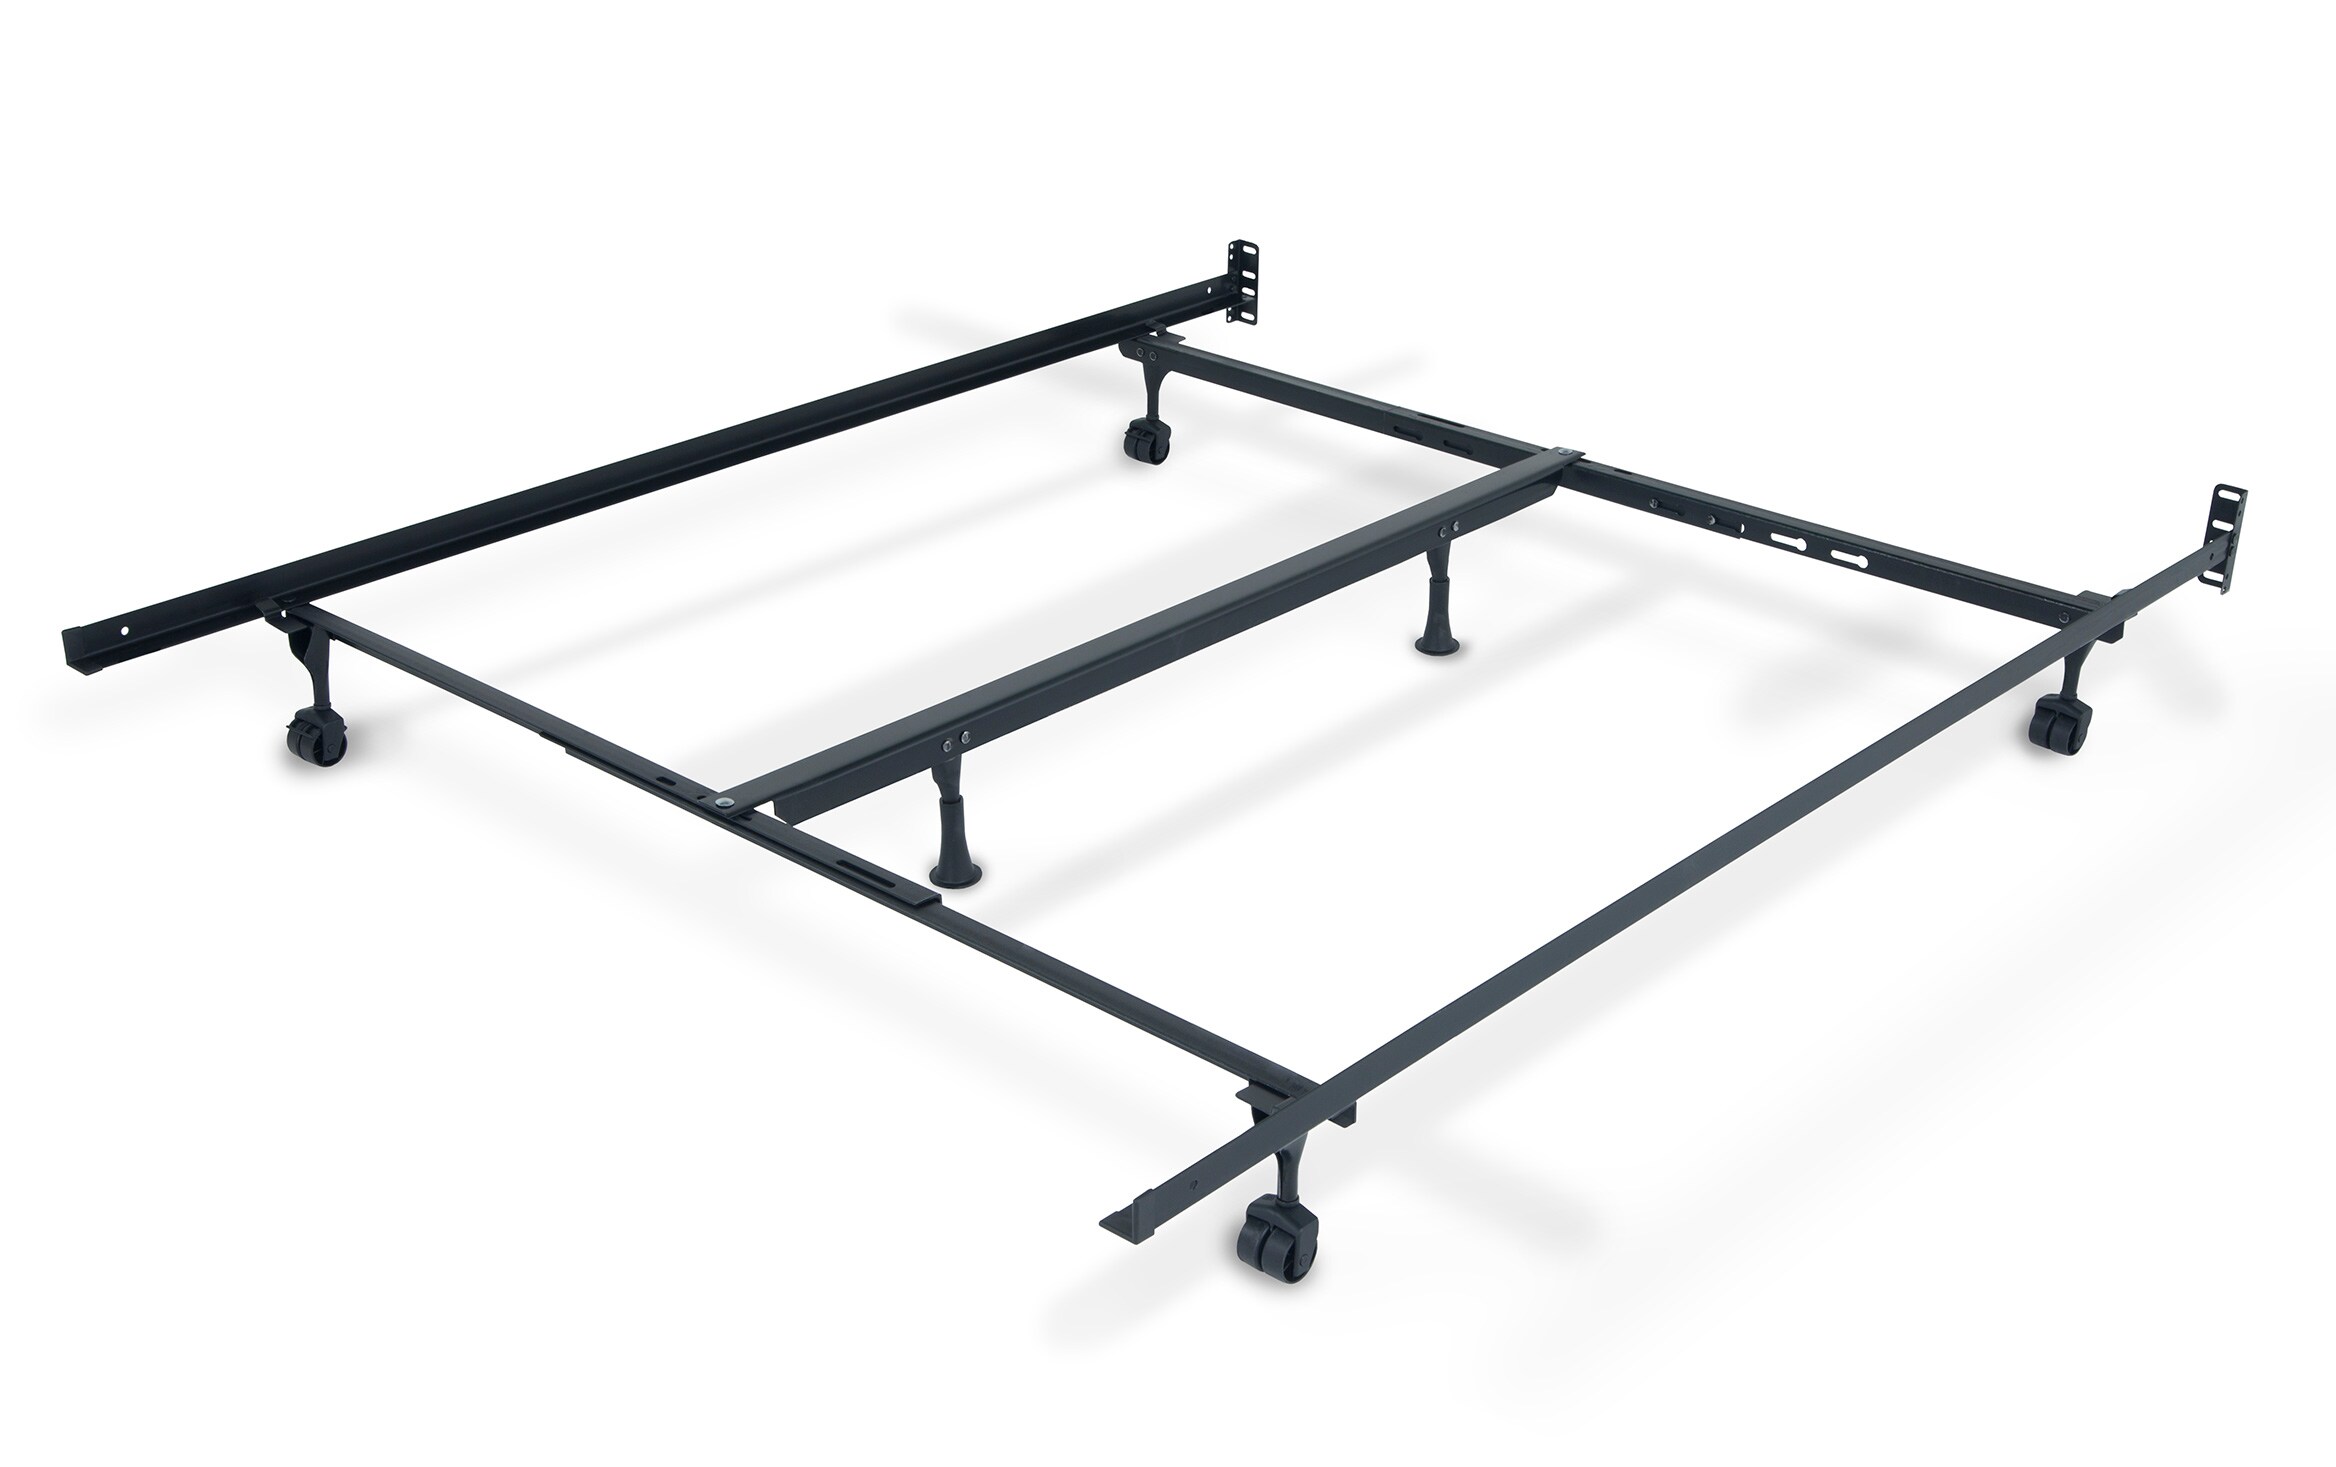 Queen King Bed Frame With Casters Bob, Metal Bed Frame With Casters